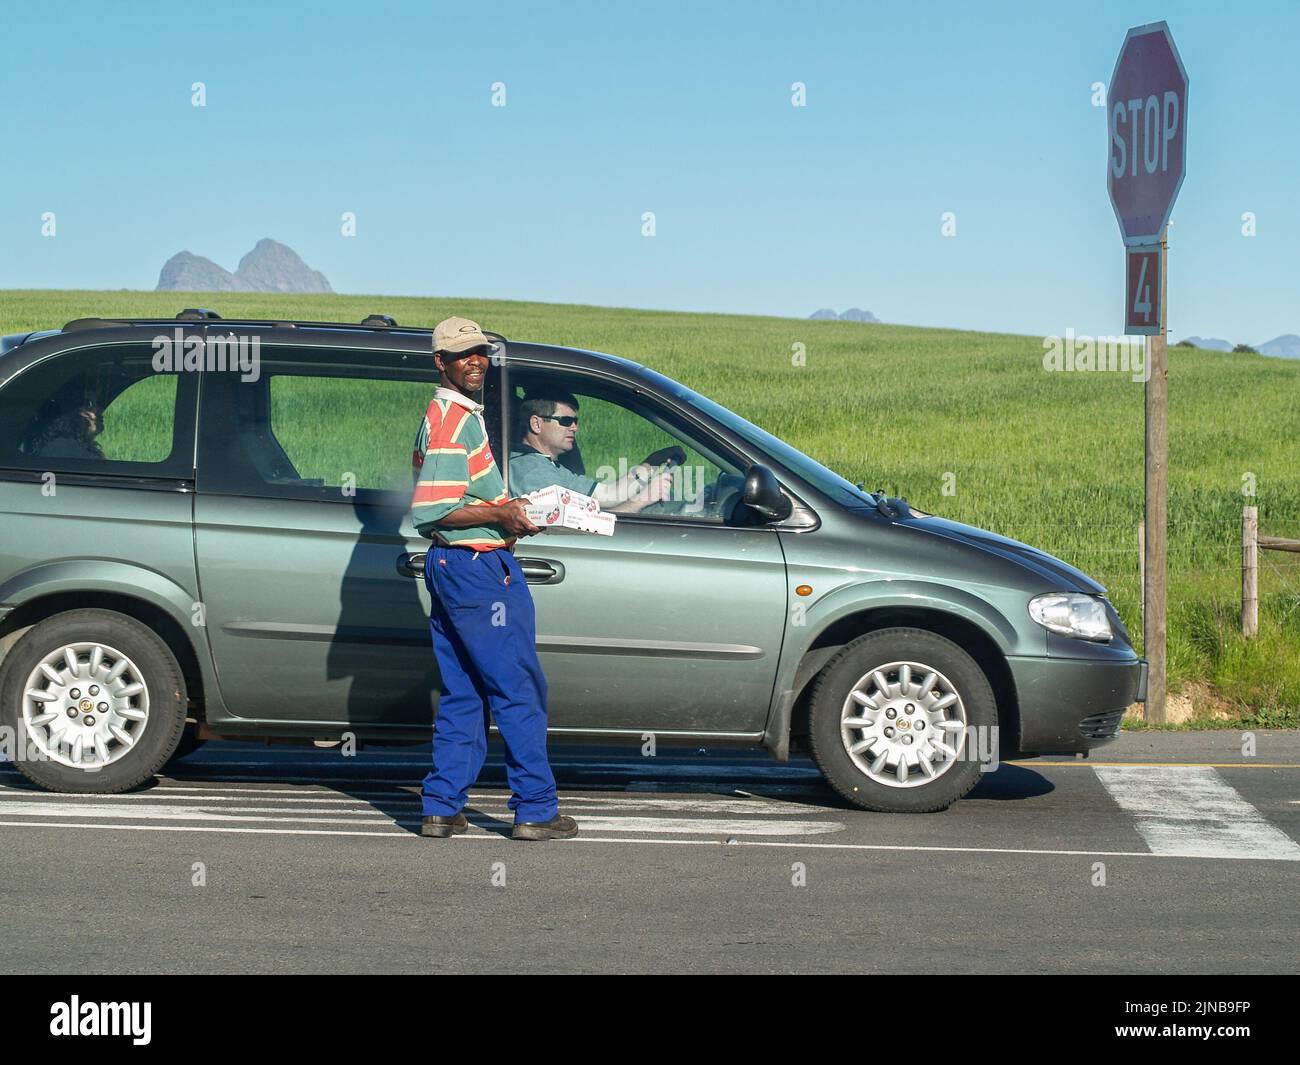 Cape Town South Africa August 26 2007: Man turns and smiles standing by stopped car trying to sell strawberries and earn a living. Stock Photo